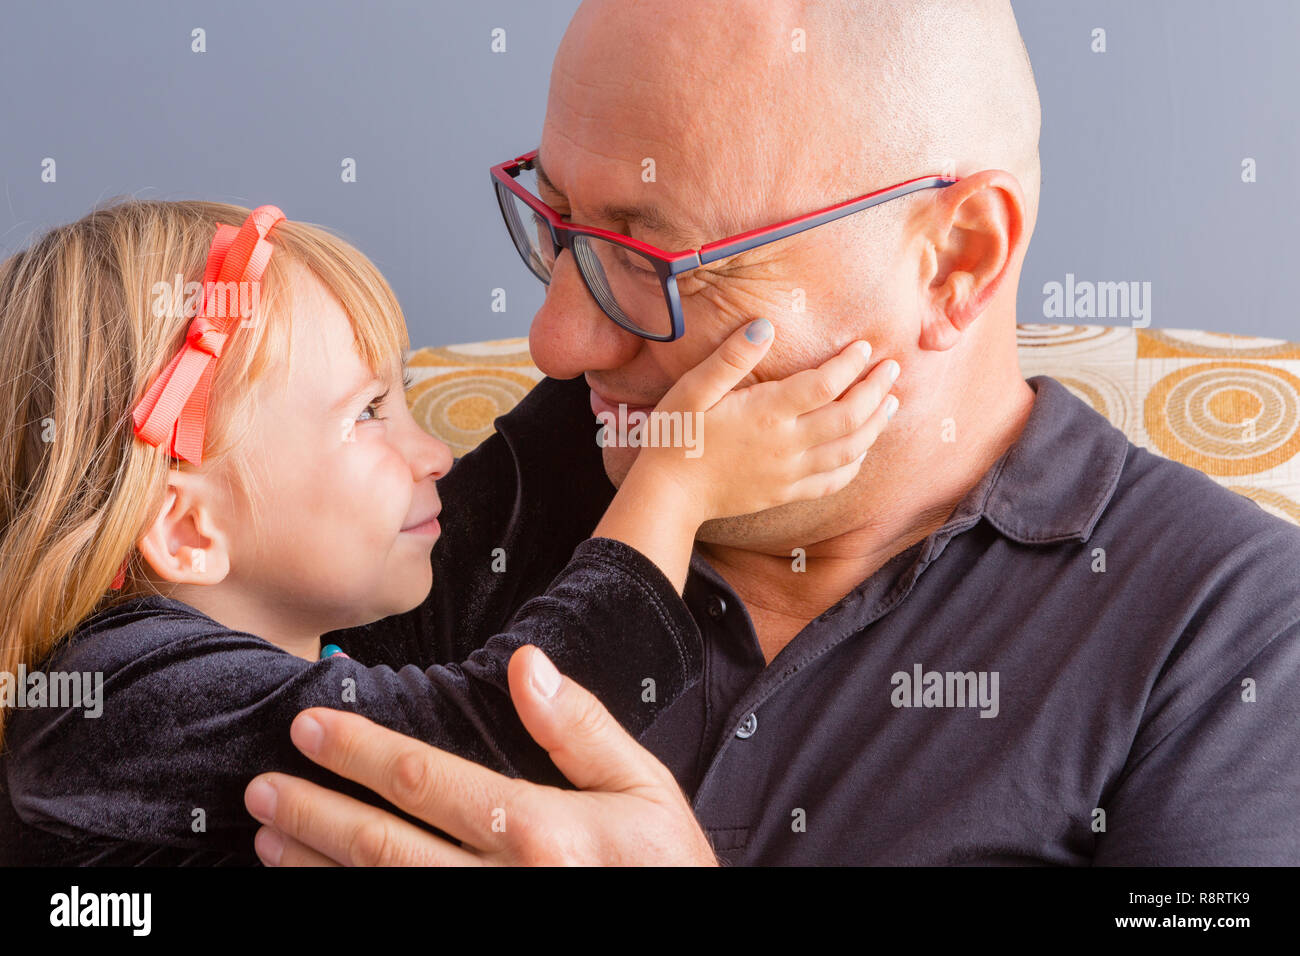 Loving father and daughter share a tender moment as the little girl caresses her Daddy on the cheeks with a beautiful smile in a close up cropped port Stock Photo